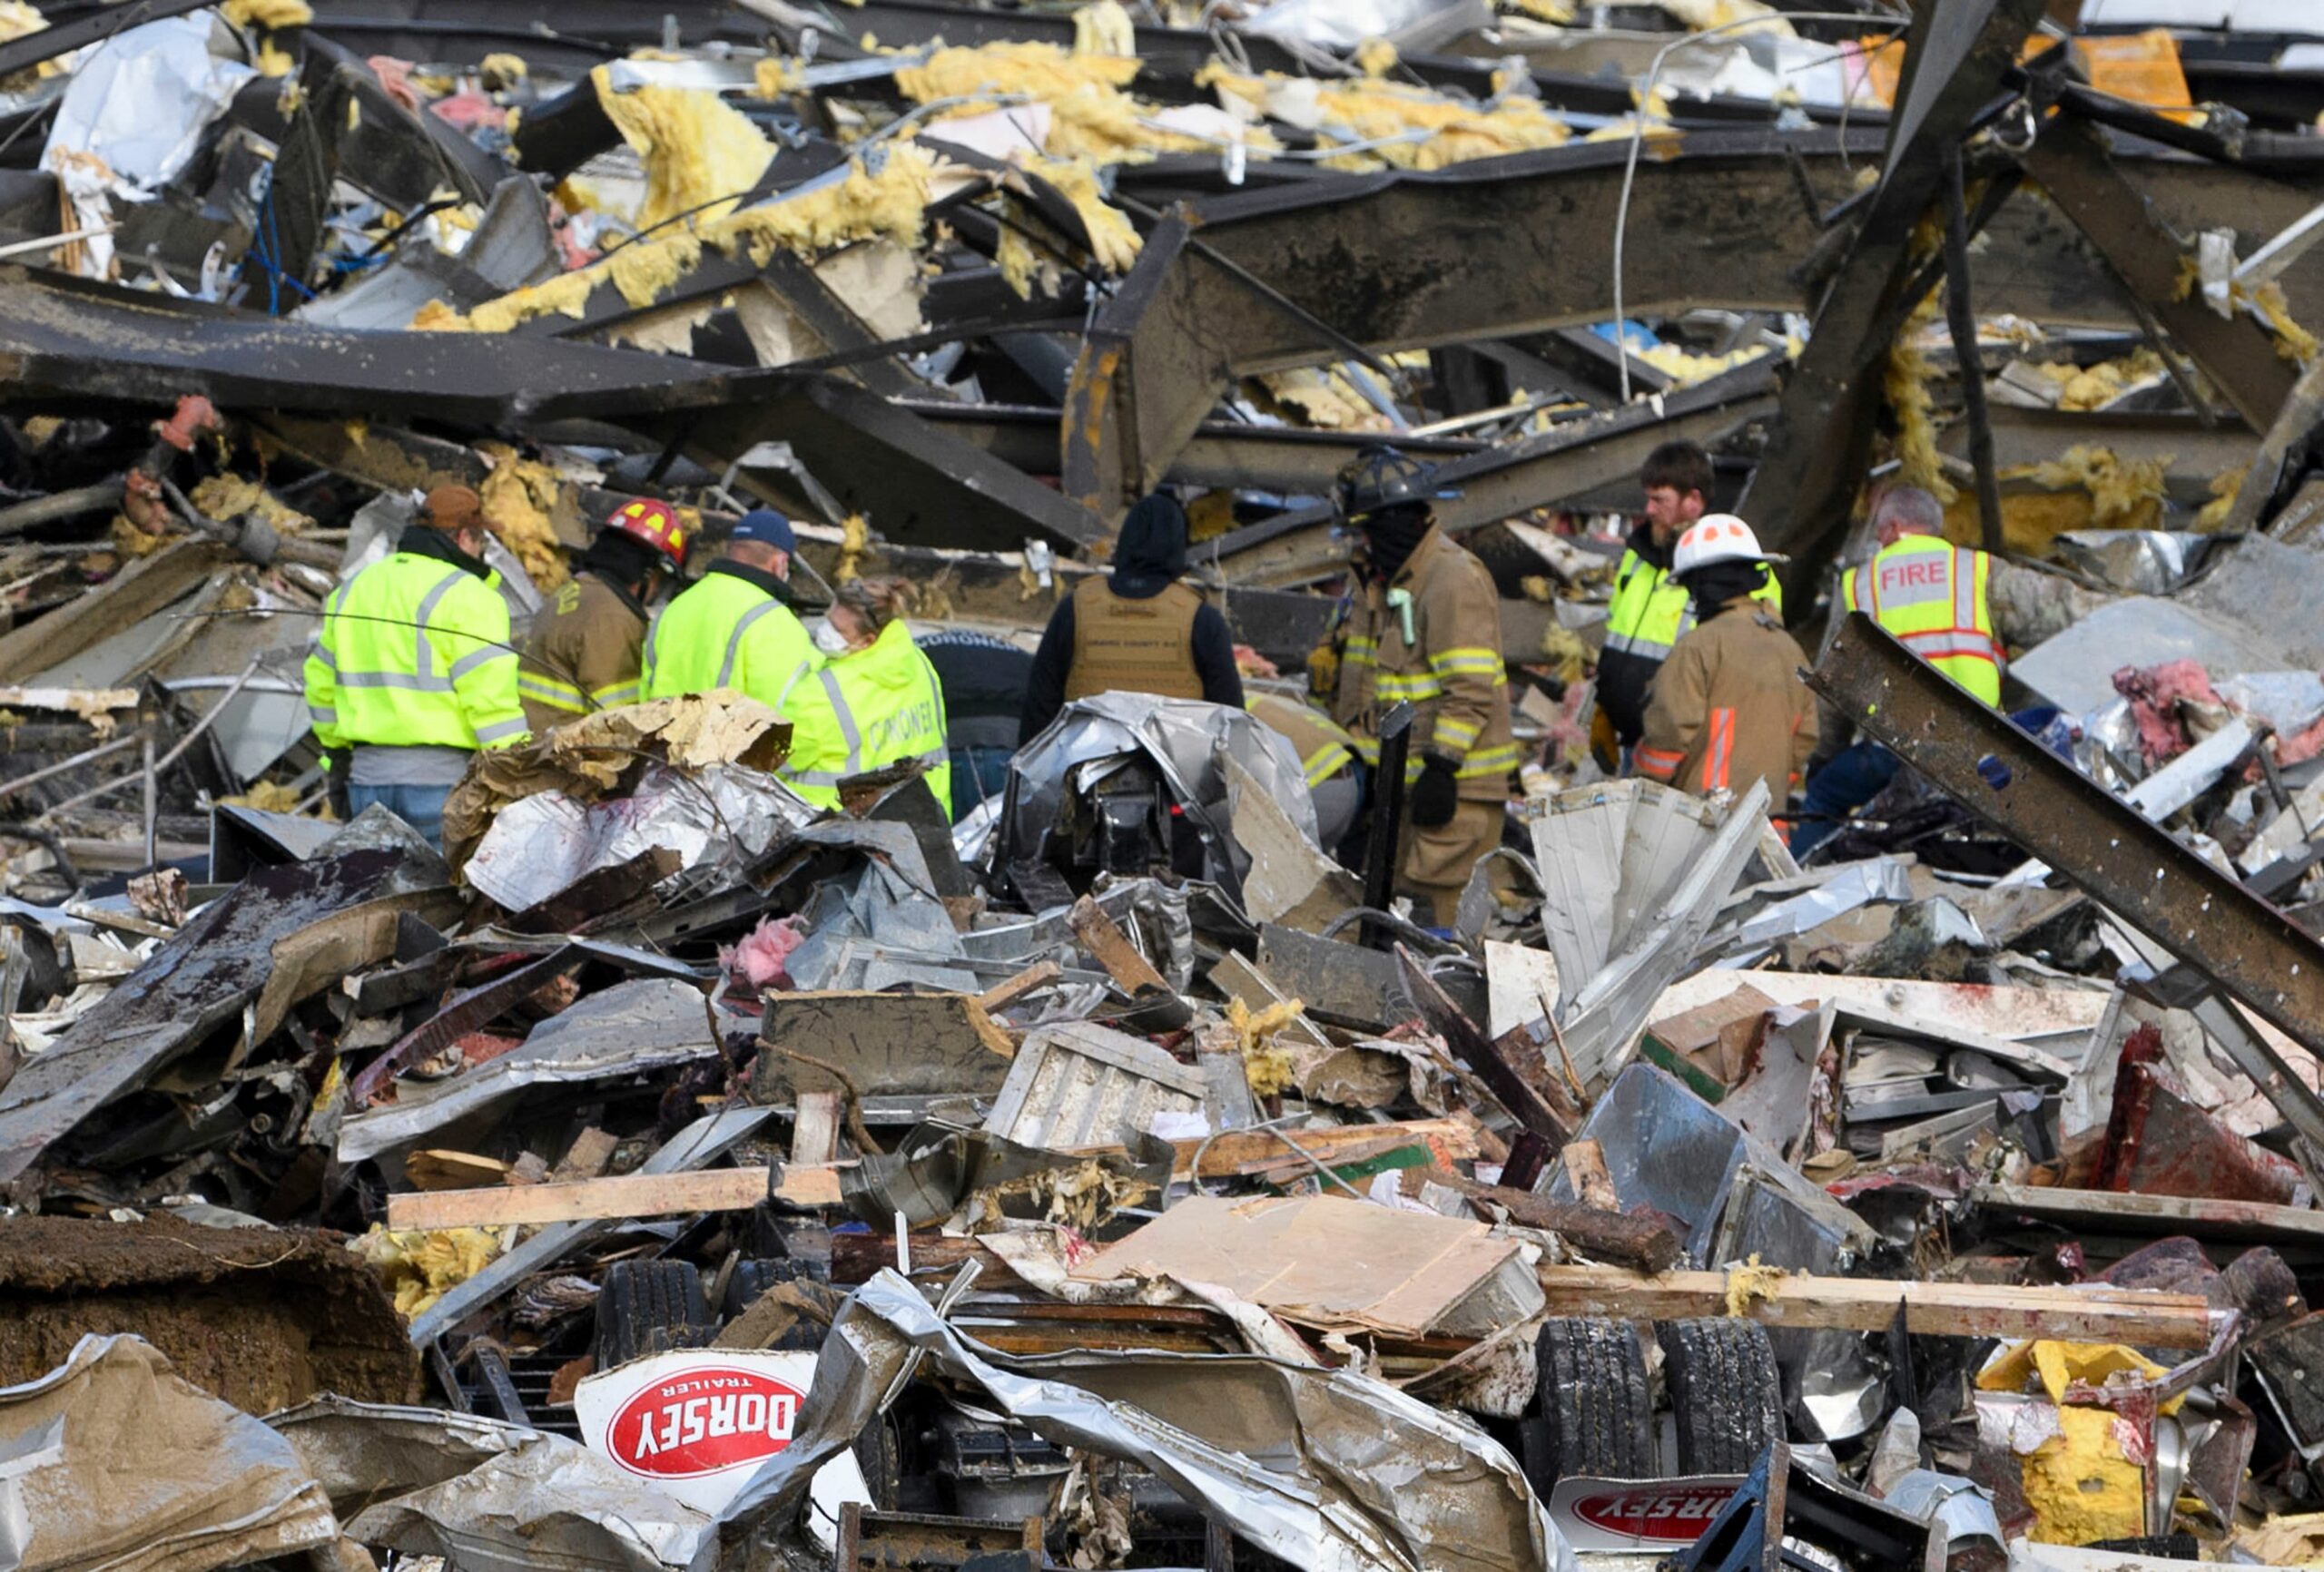 More than 100 still missing after Kentucky tornadoes; death toll stands at 74